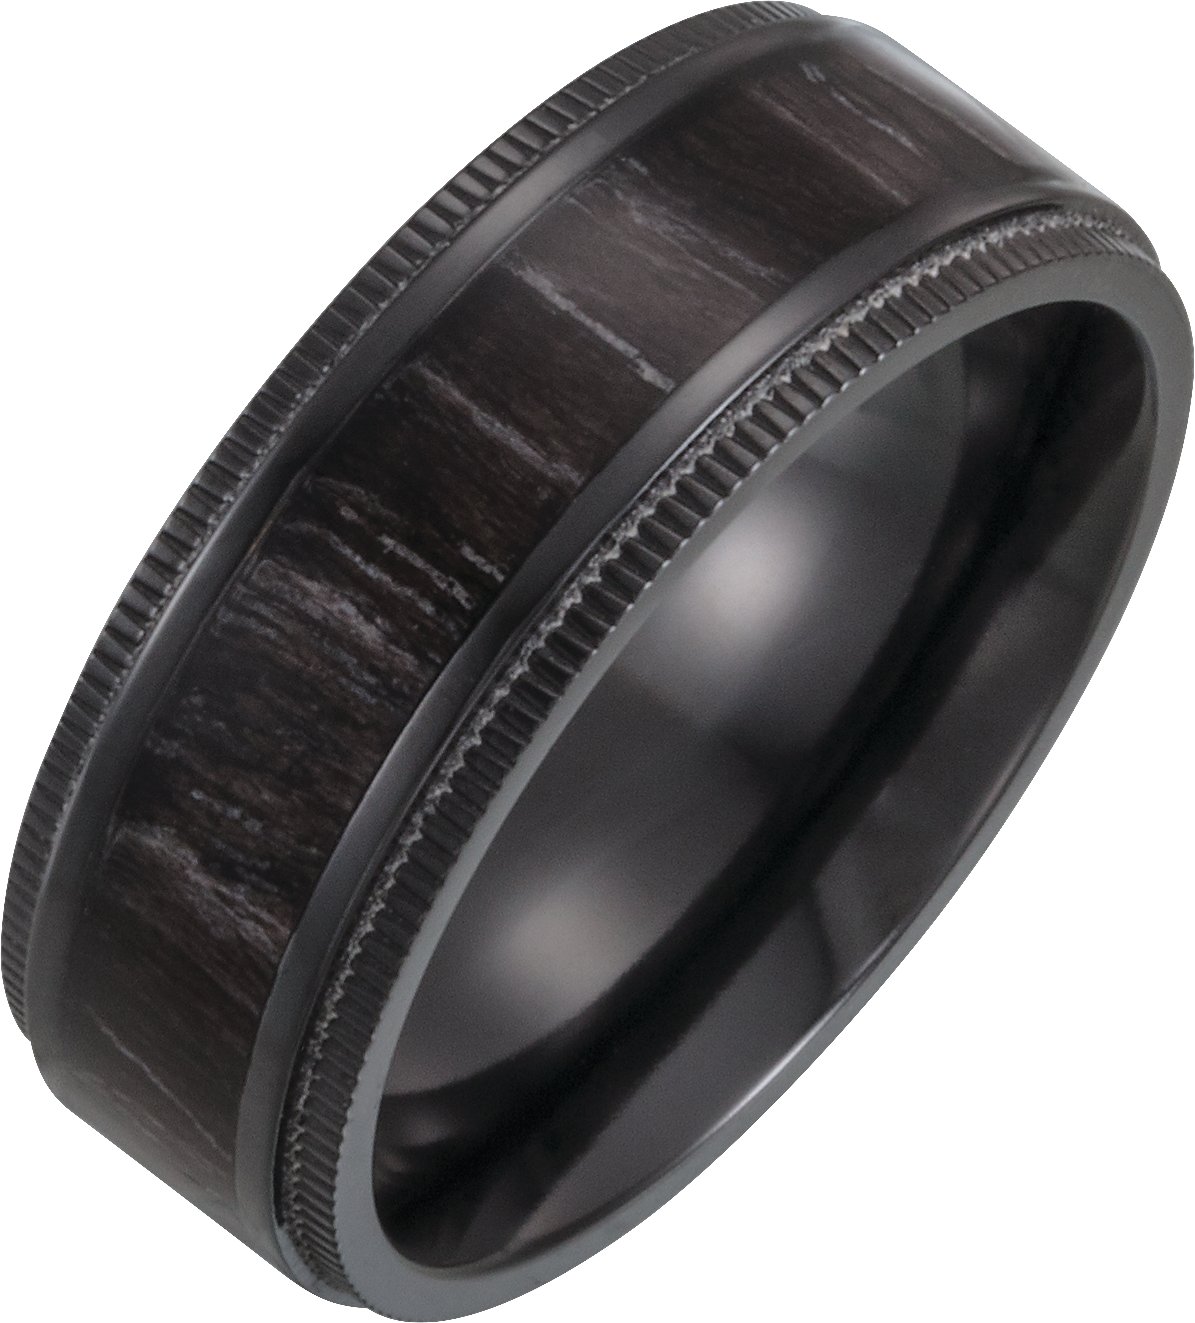 Black Titanium 8 mm Coin Edge Band with Wood Inlay Size 13.5 Ref 16120554